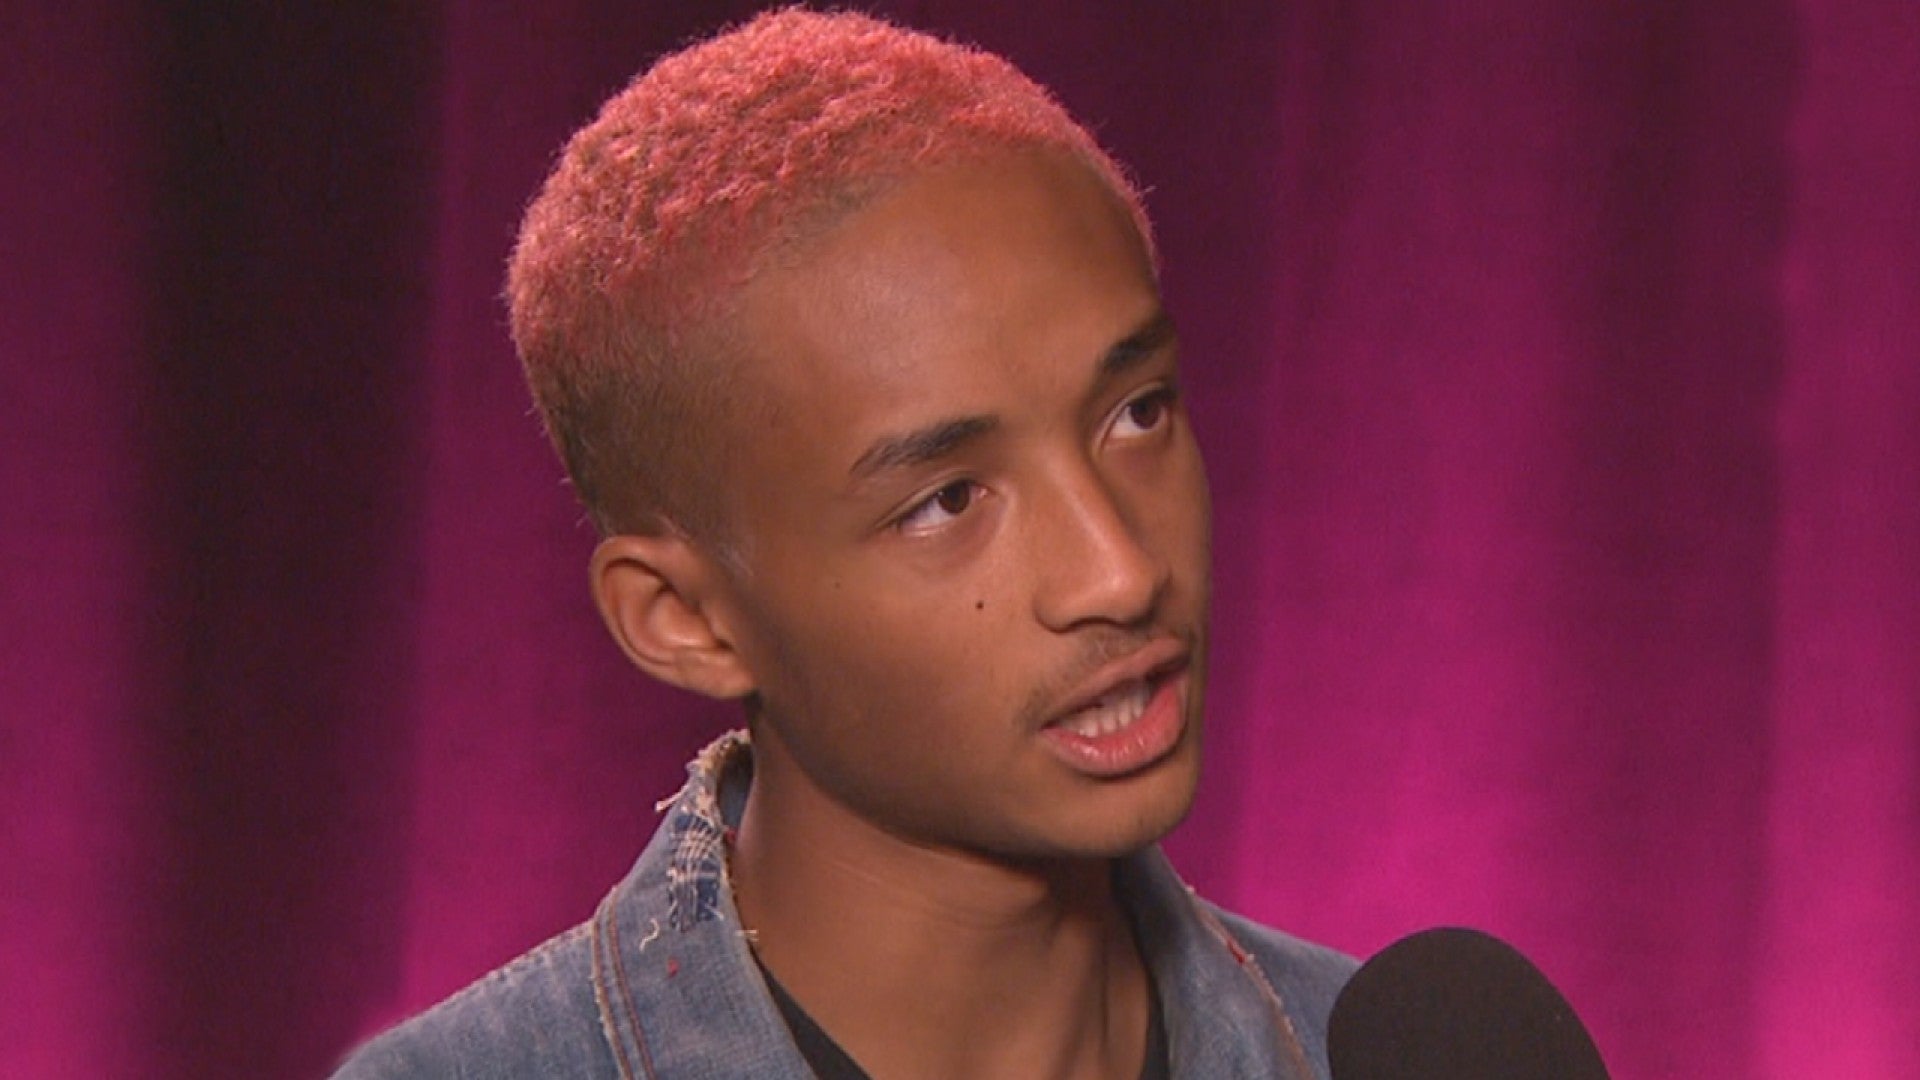 EXCLUSIVE Jaden Smith on What His Famous Parents Really Think of Him Growing Up and Moving image